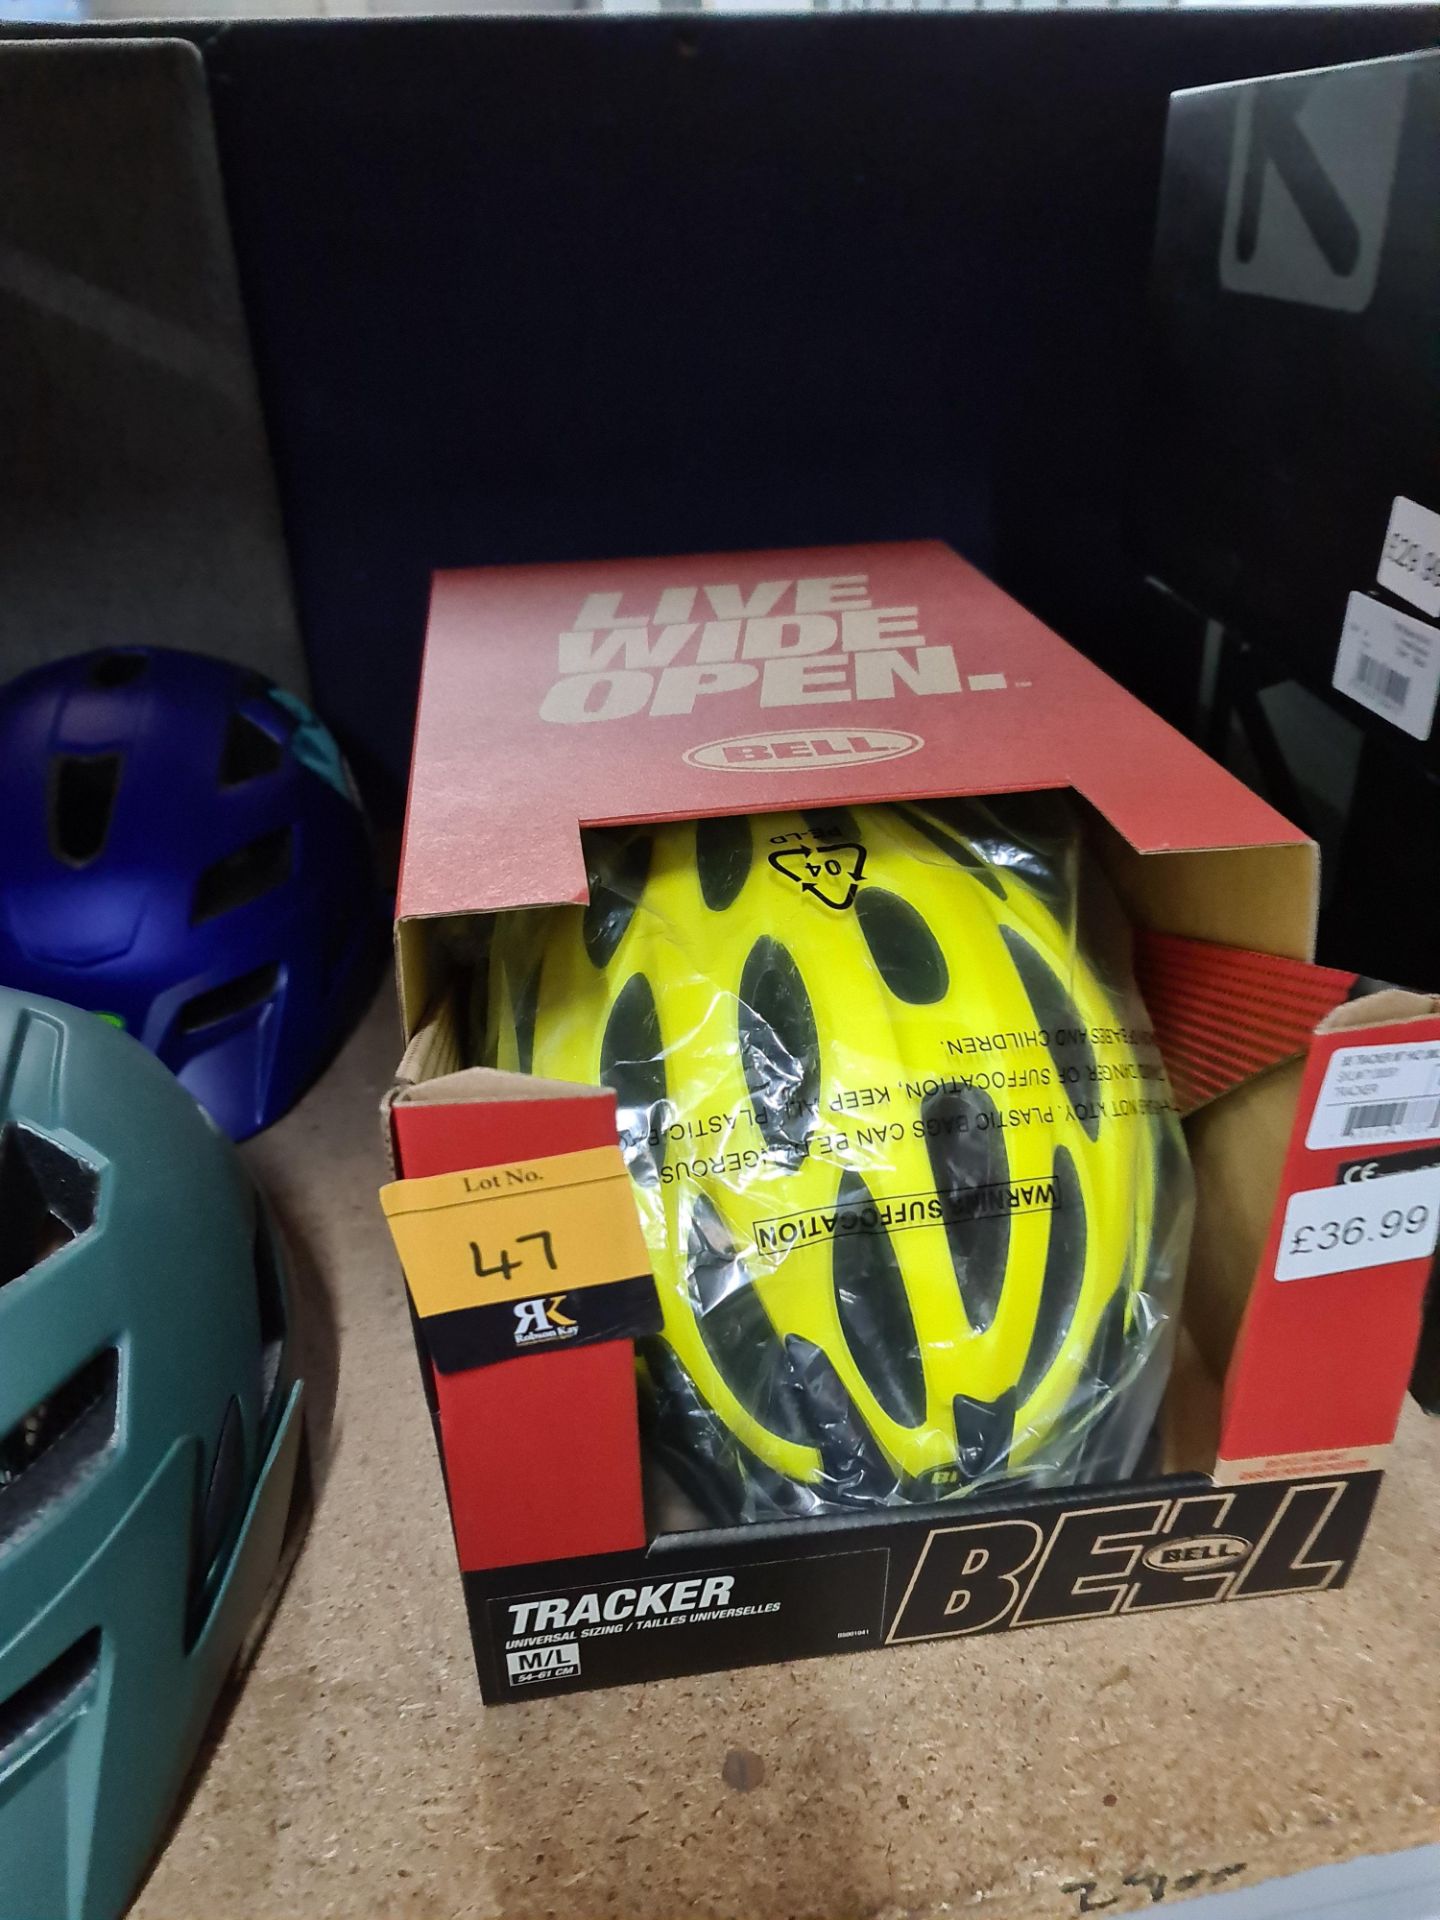 1 off Bell tracker bicycle helmet (size M/L, universal sizing), boxed